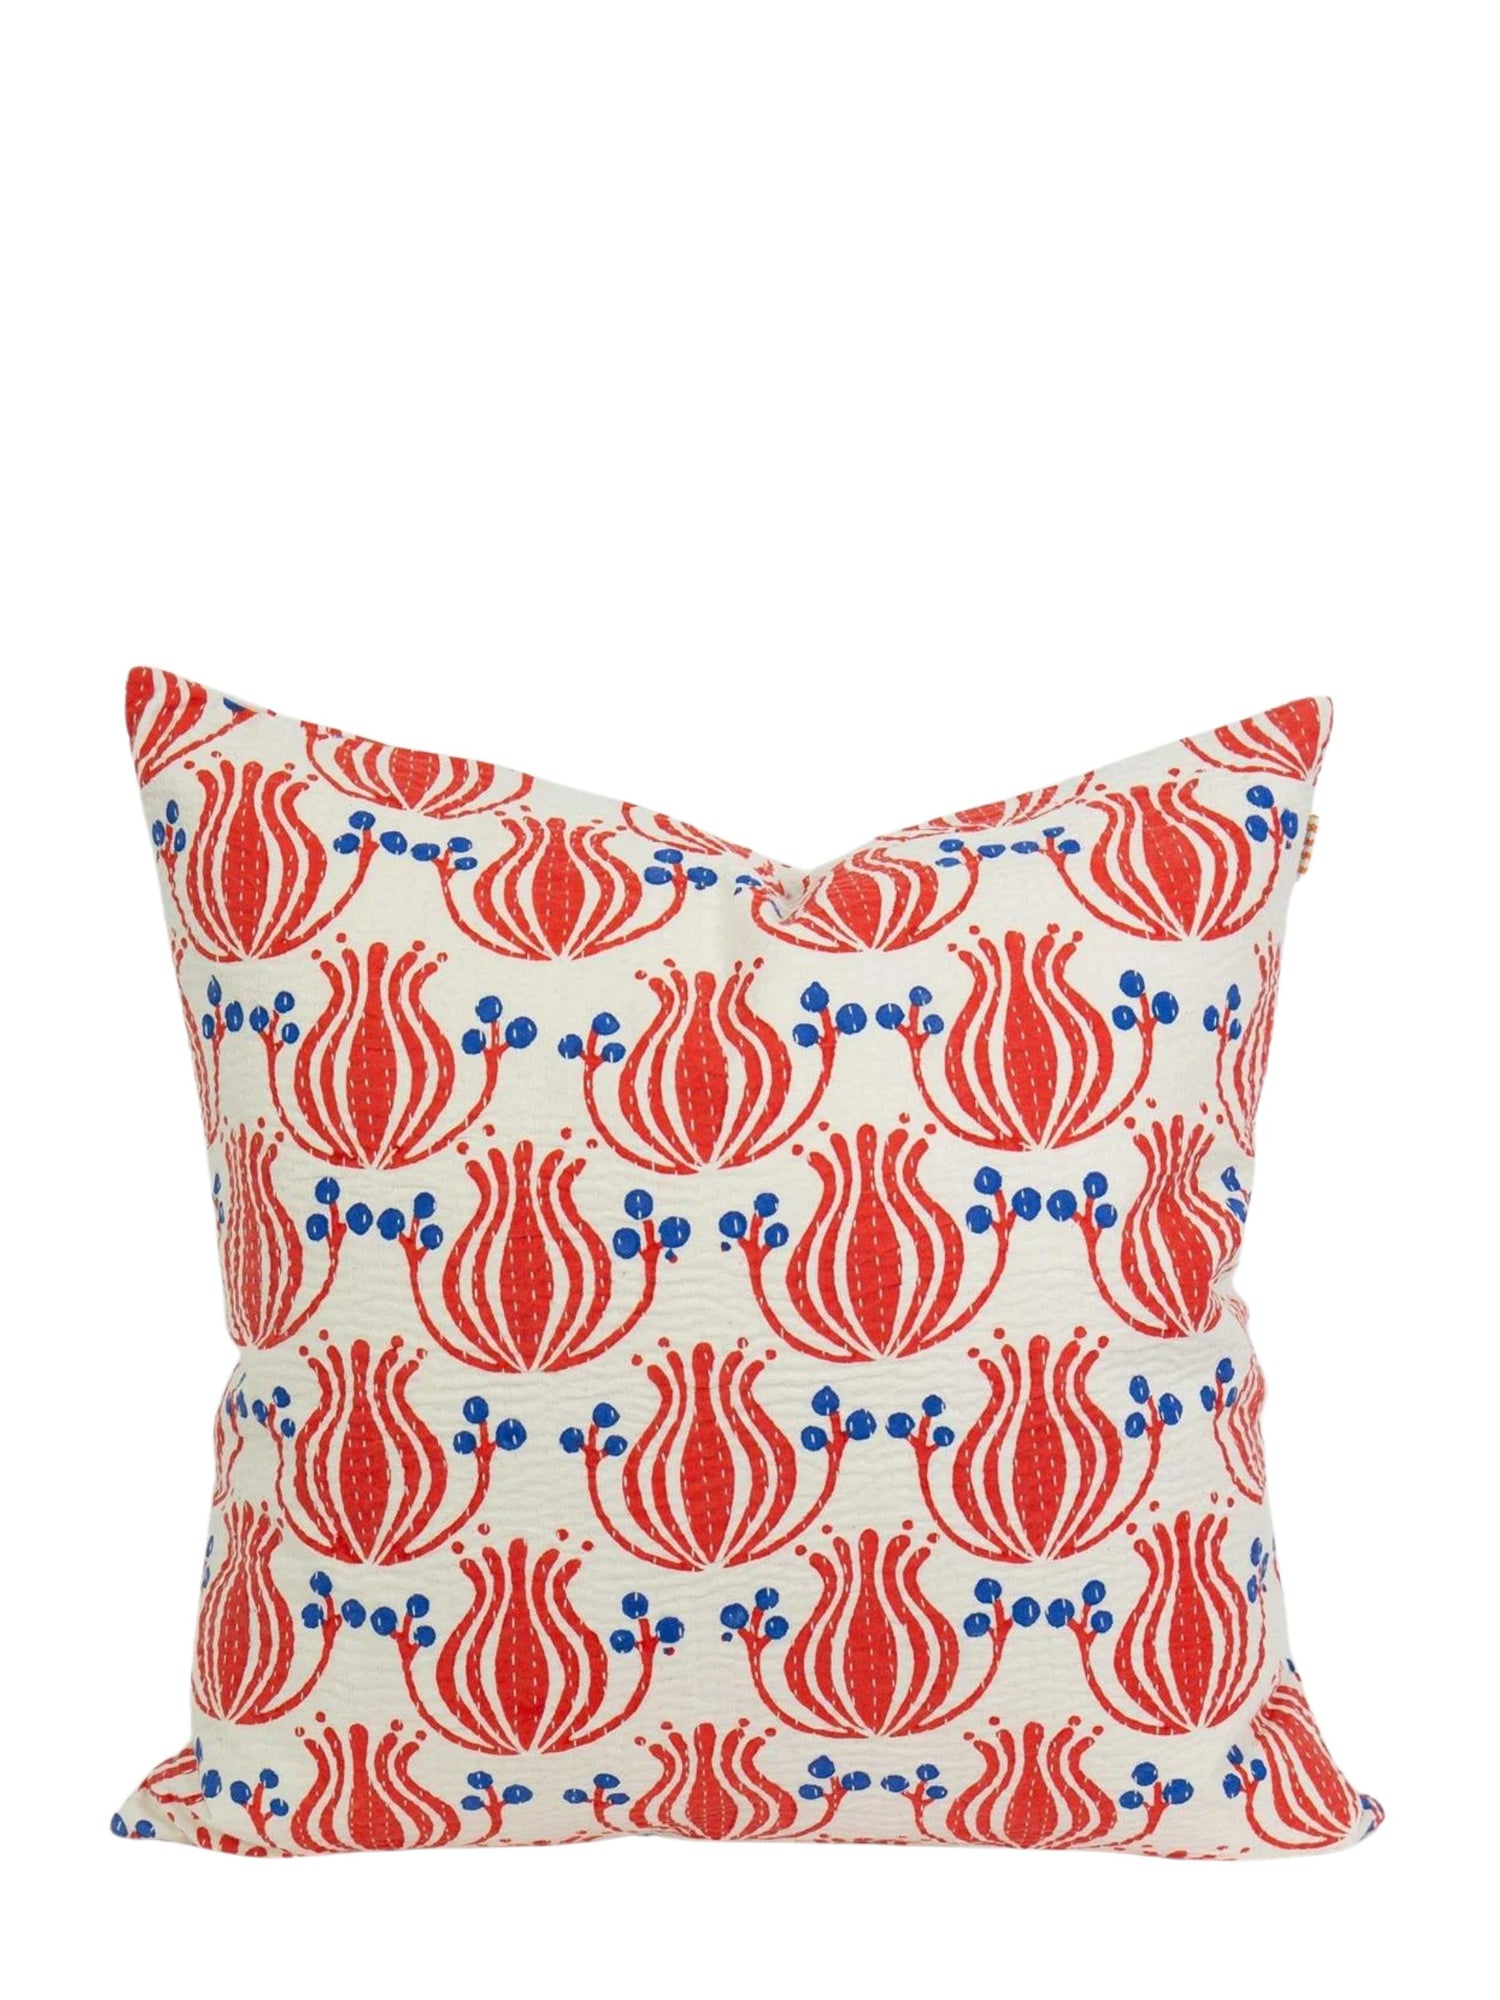 Flower Cushion Cover (50x50cm), red-blue